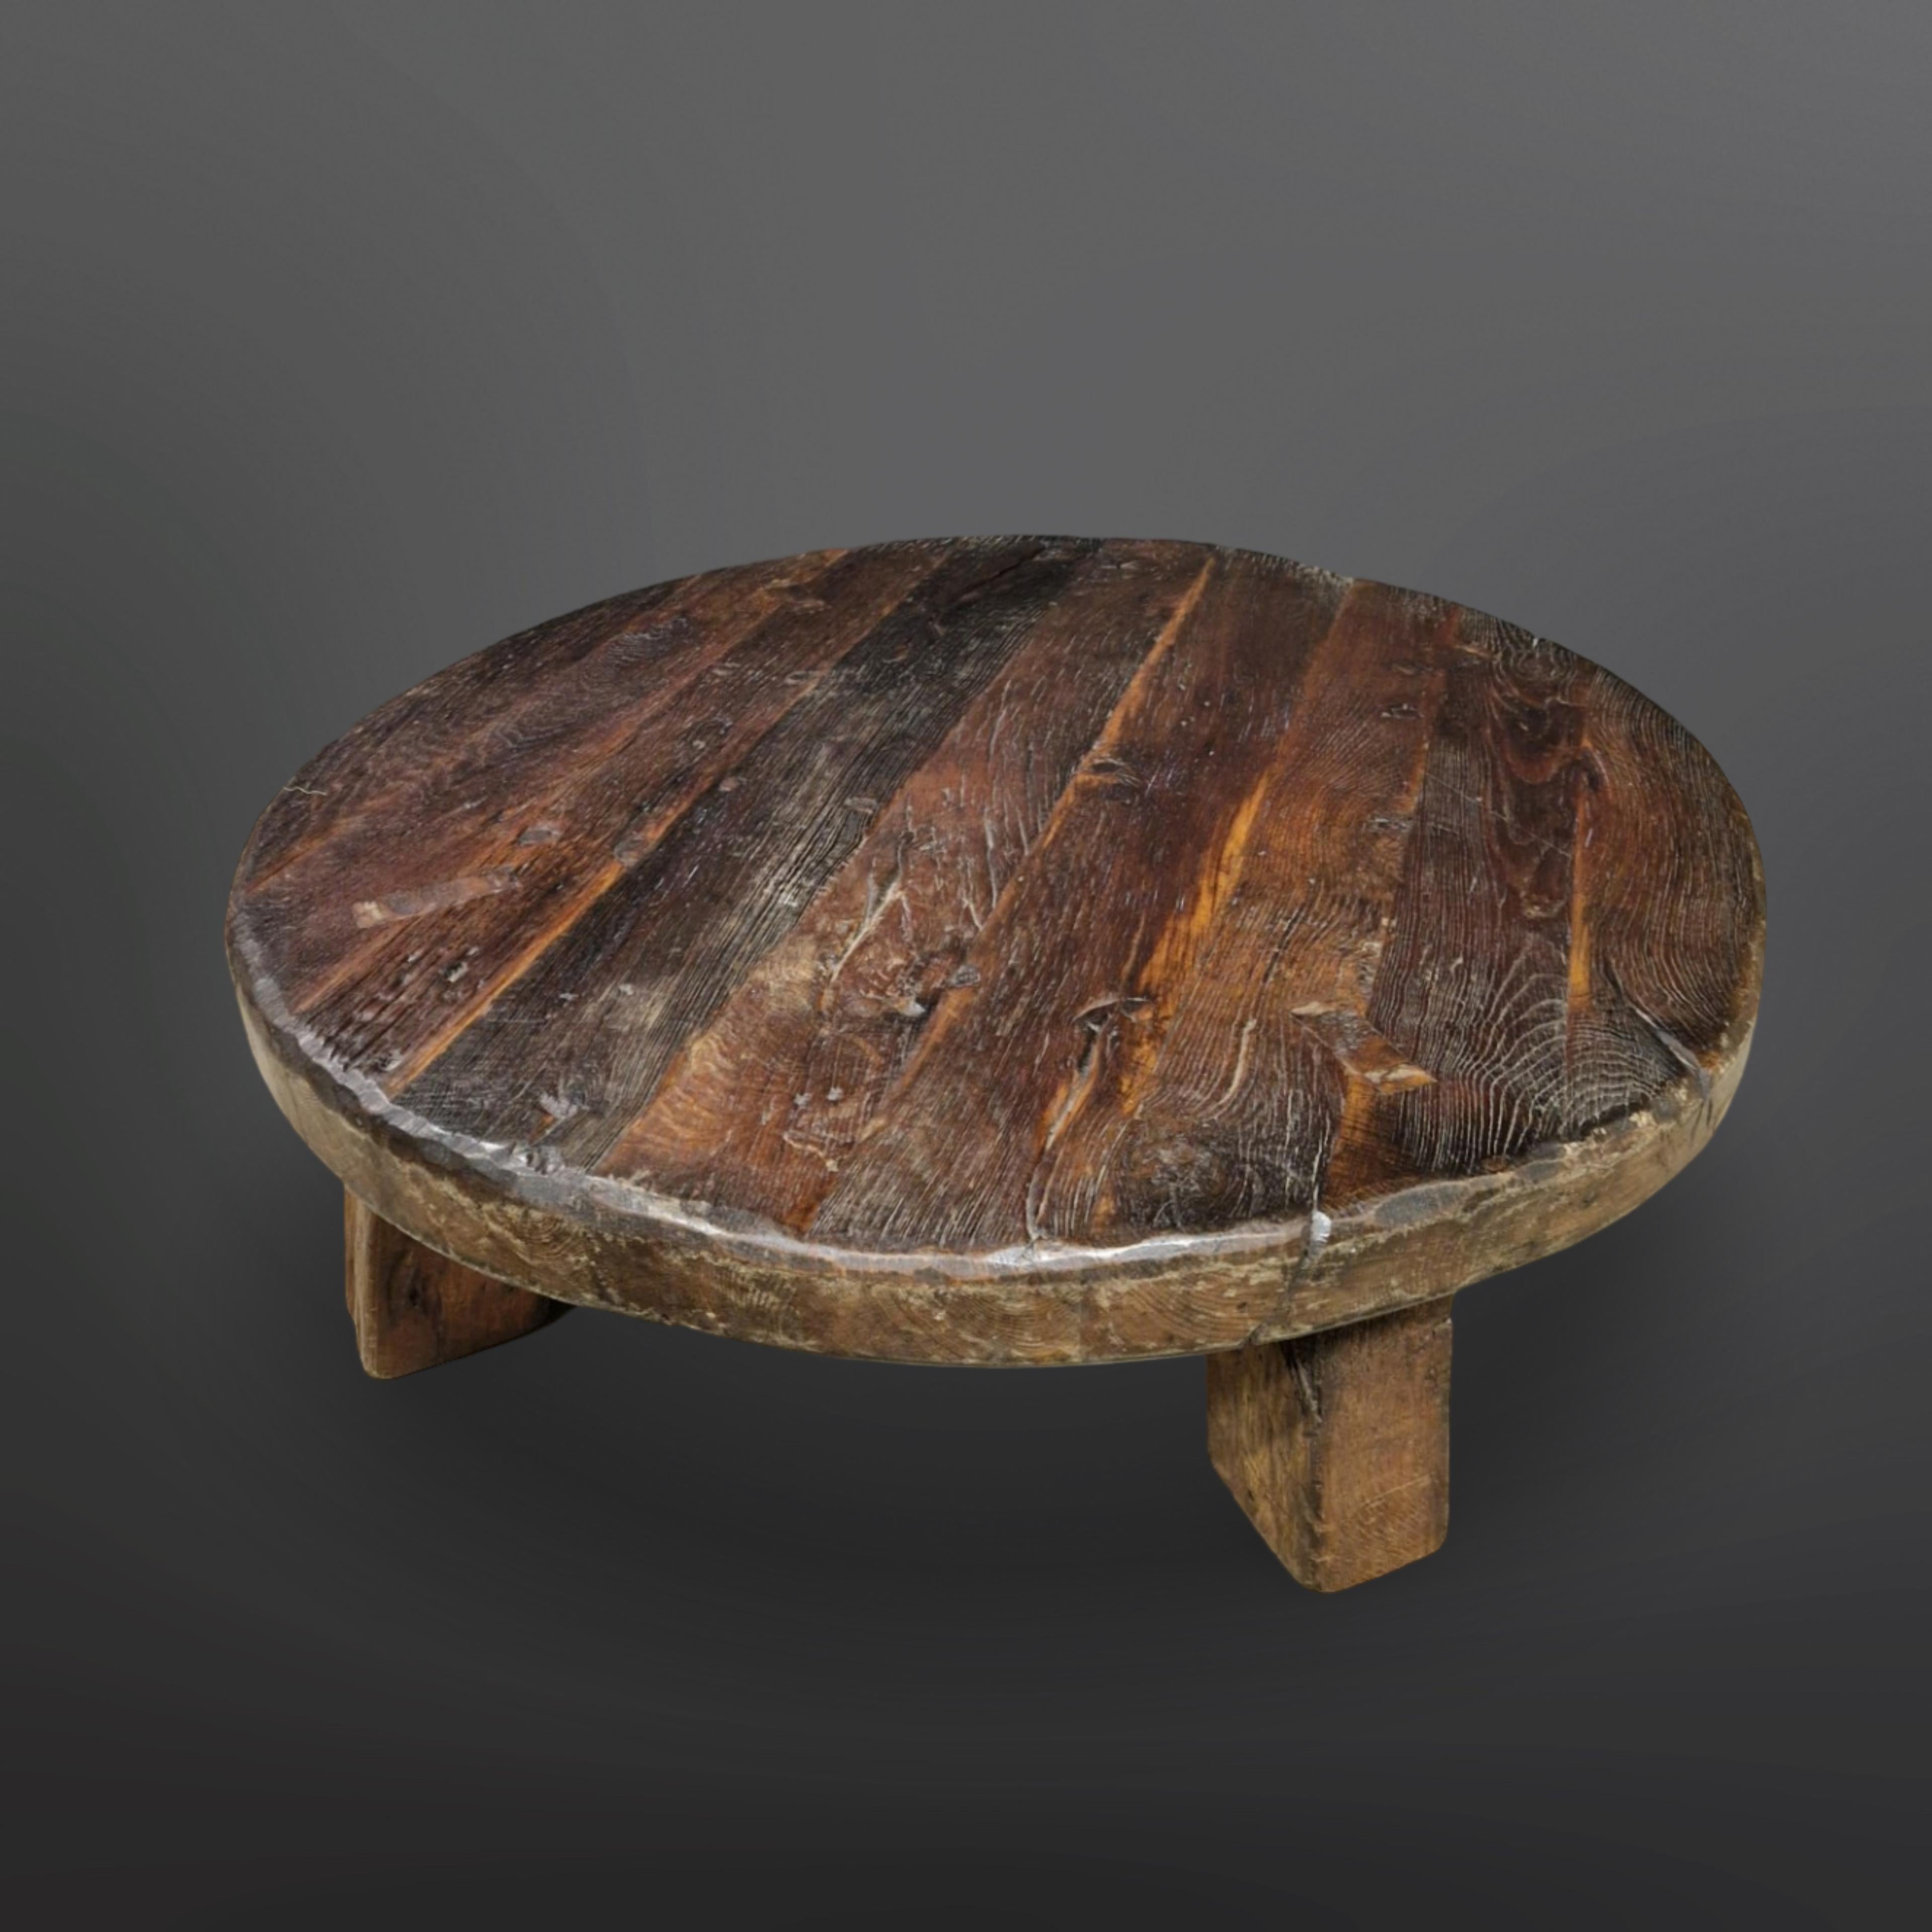 Hand crafted solid oak coffee table. 130cm thick round top with lots of patina and relief. The four legs have been mounted through the top showing the end wood and the wedges they are secured with. It was made in Europe. Probably in the Netherlands,